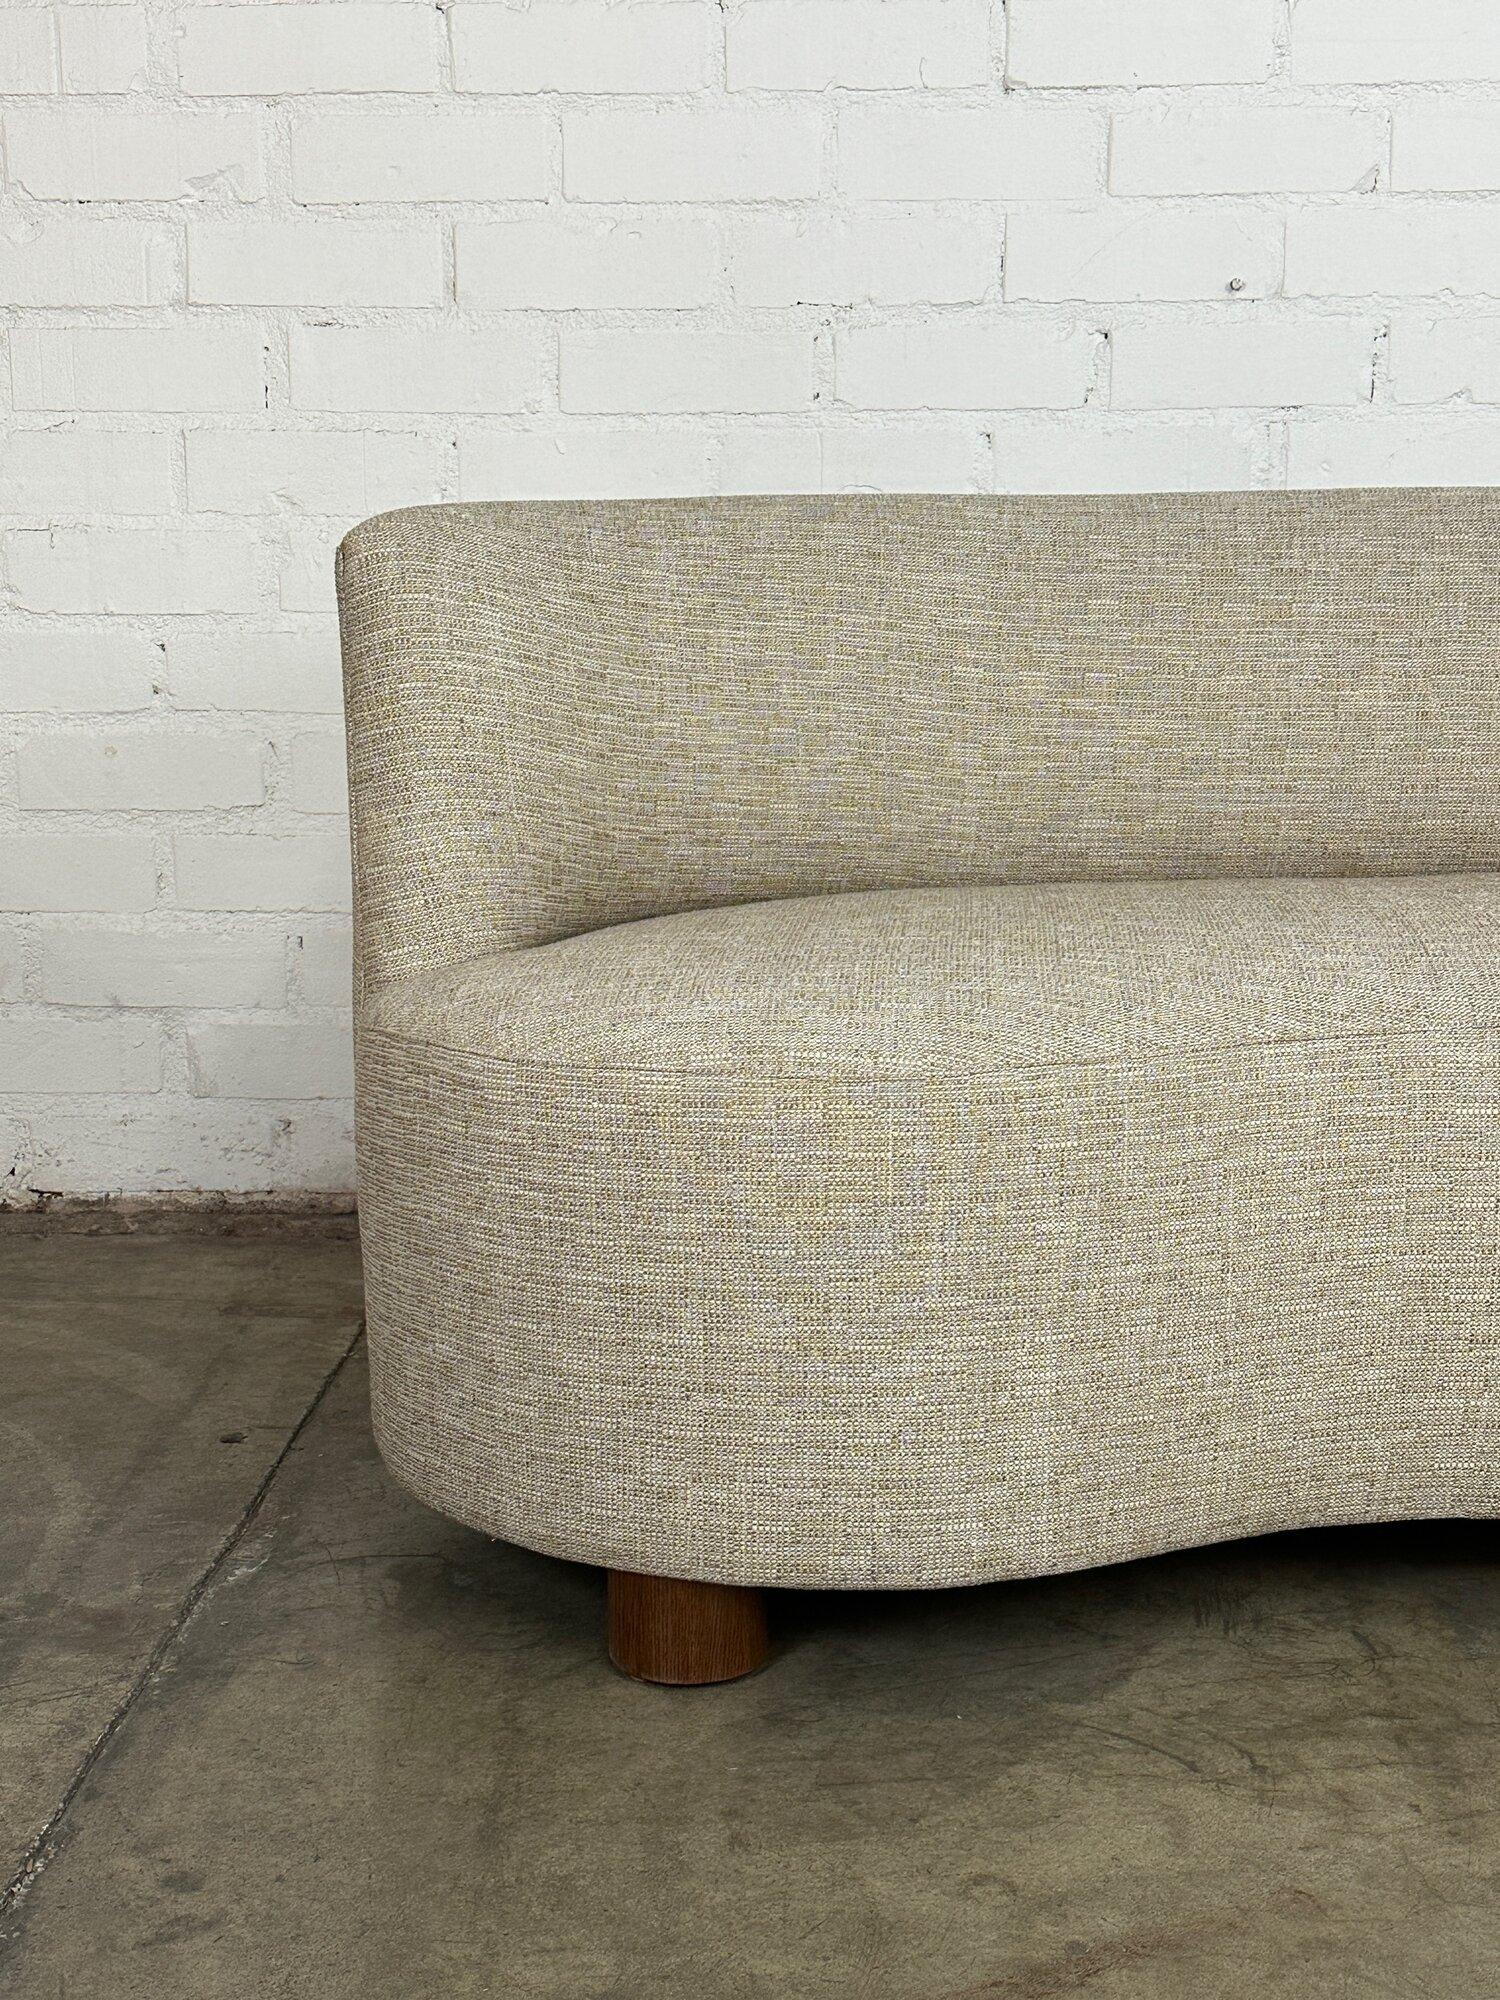 W70 D33 H29.5 SW64 SD23-24 SH17

Kidney sofa completely built from scratch in house in soft tweed and turned white oak legs finished in a dark walnut. Item features a new wooden frame, new foam and new fabric. Legs are removable if needed. Item has